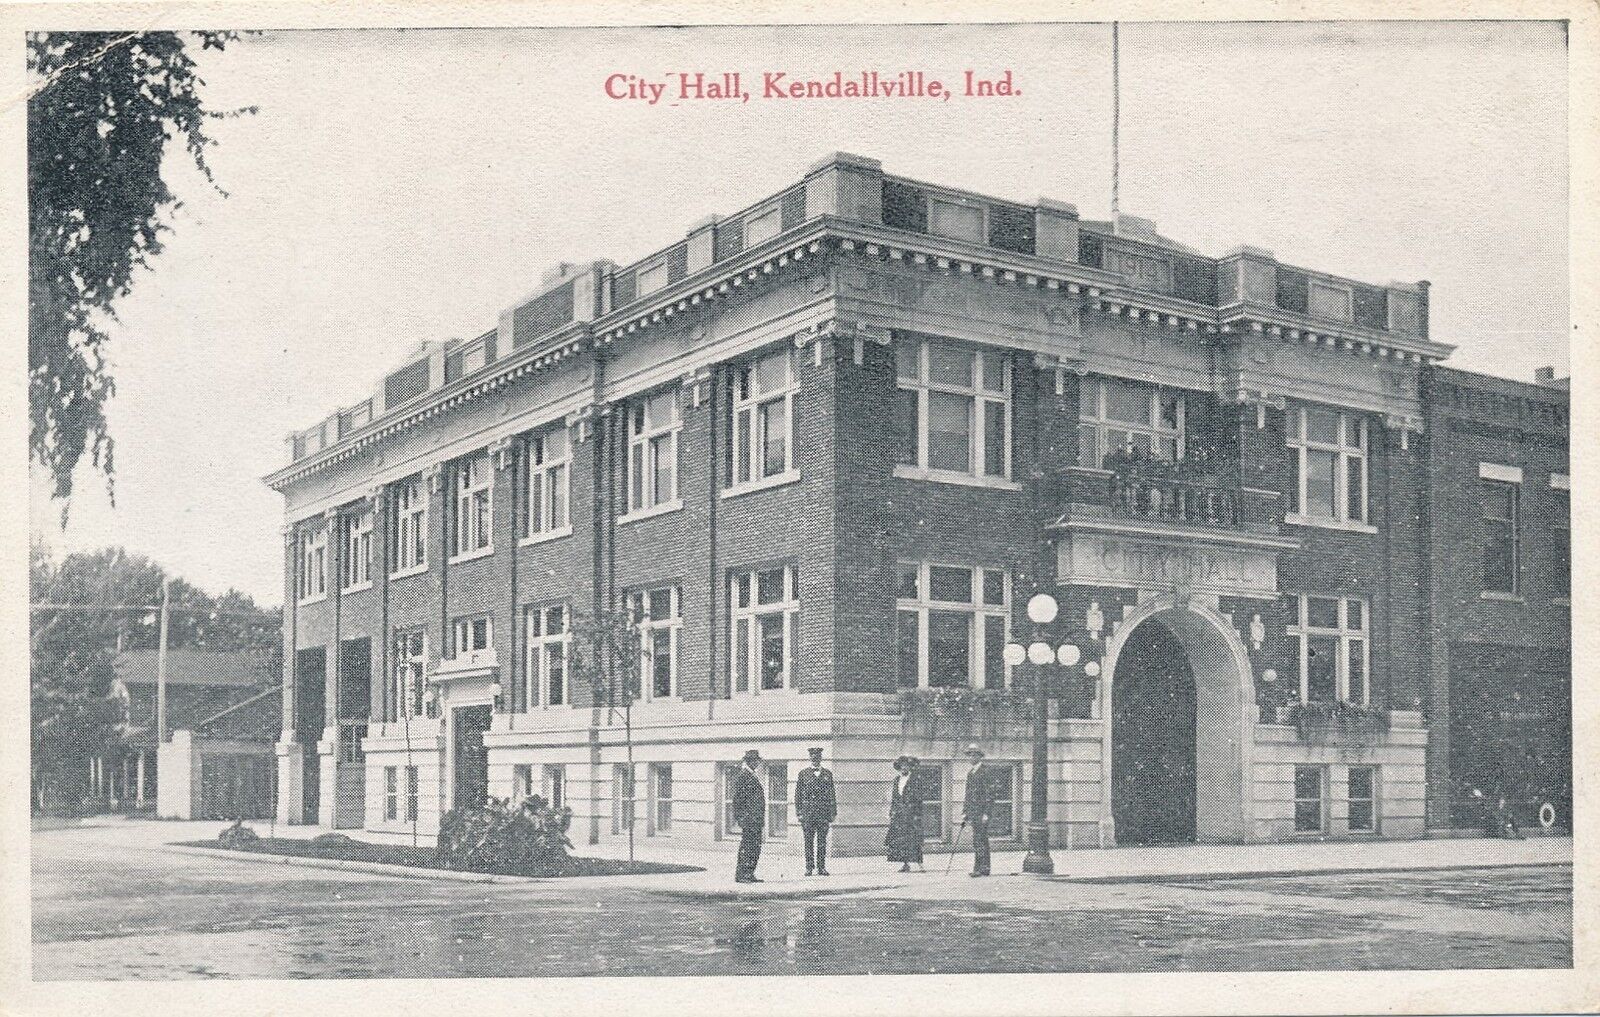 KENDALLVILLE IN – City Hall